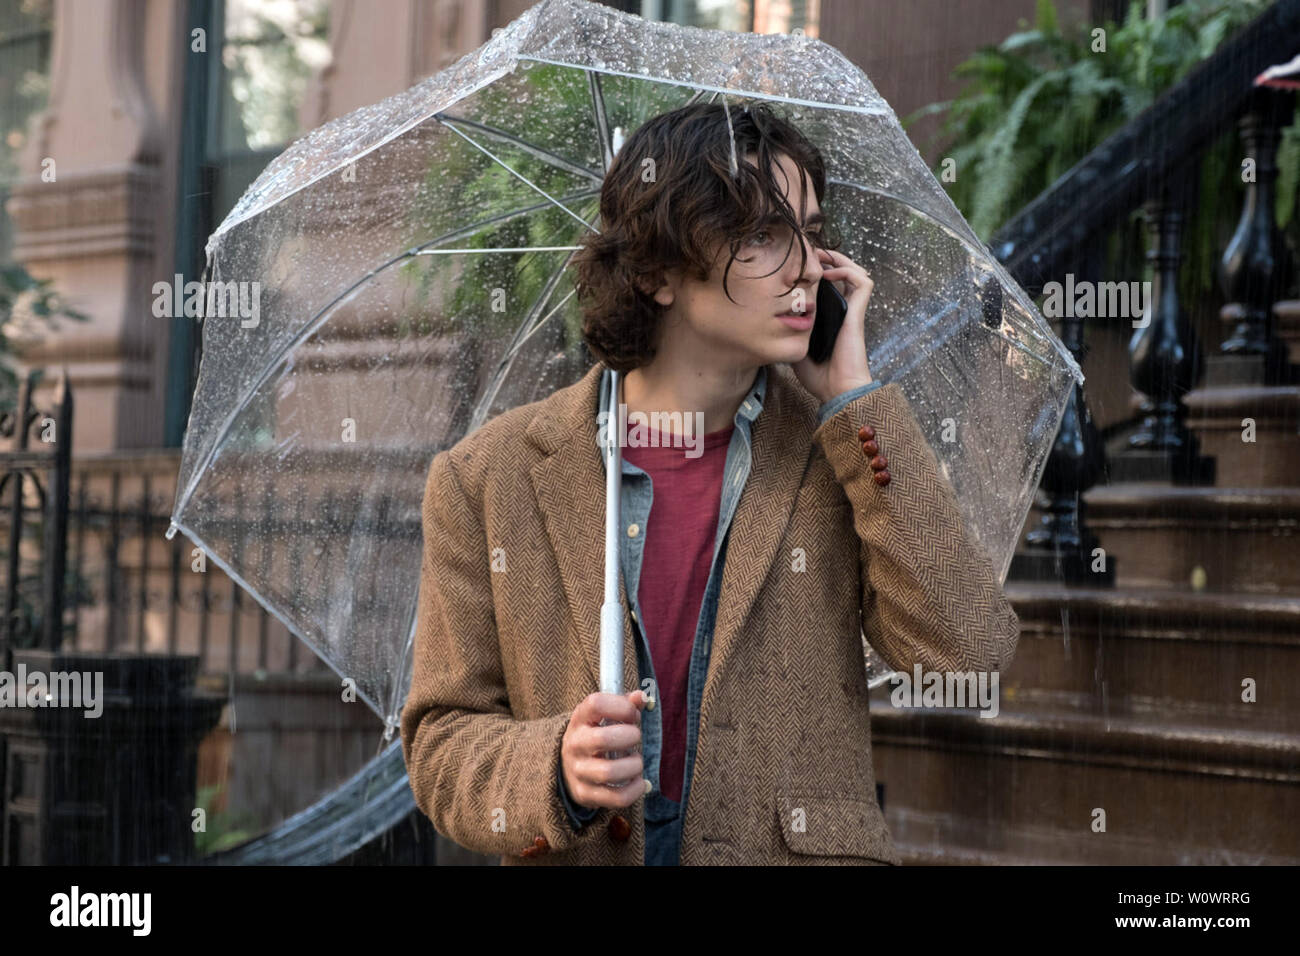 A Rainy Day In New York – Woody Allen's rendition of an old